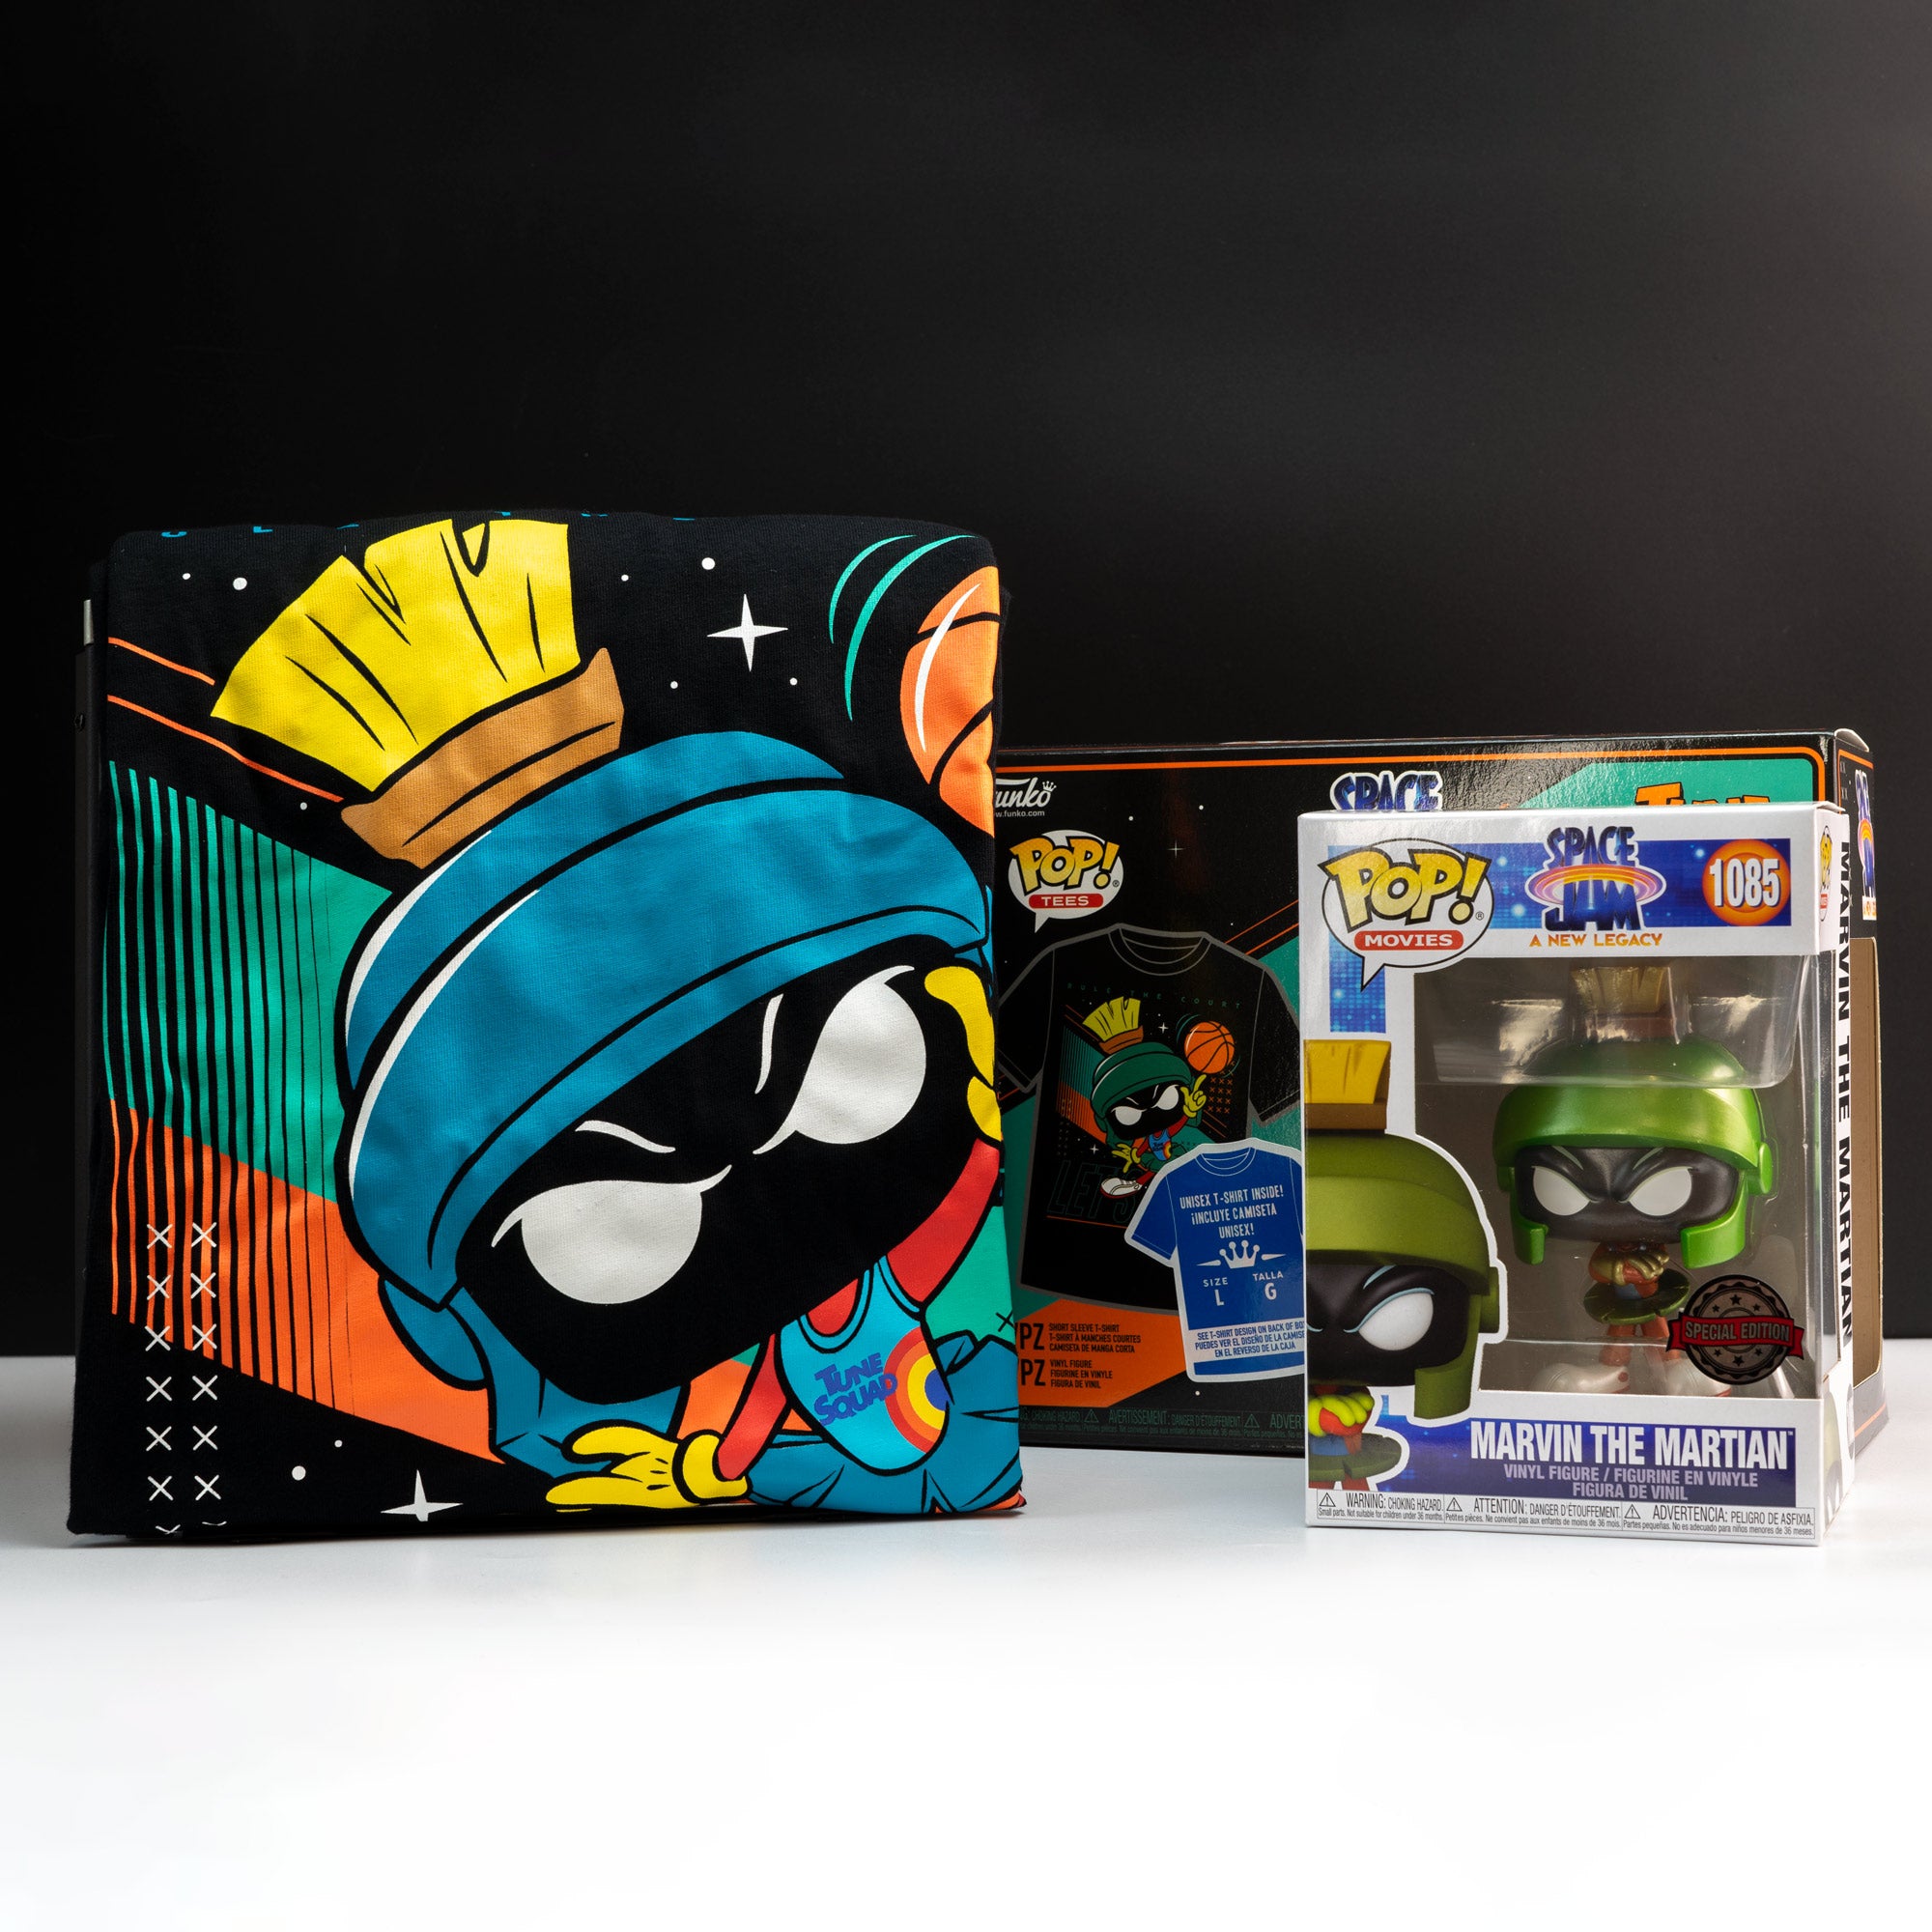 Space Jam 2 Marvin the Martian Pop! Vinyl and Tee Set